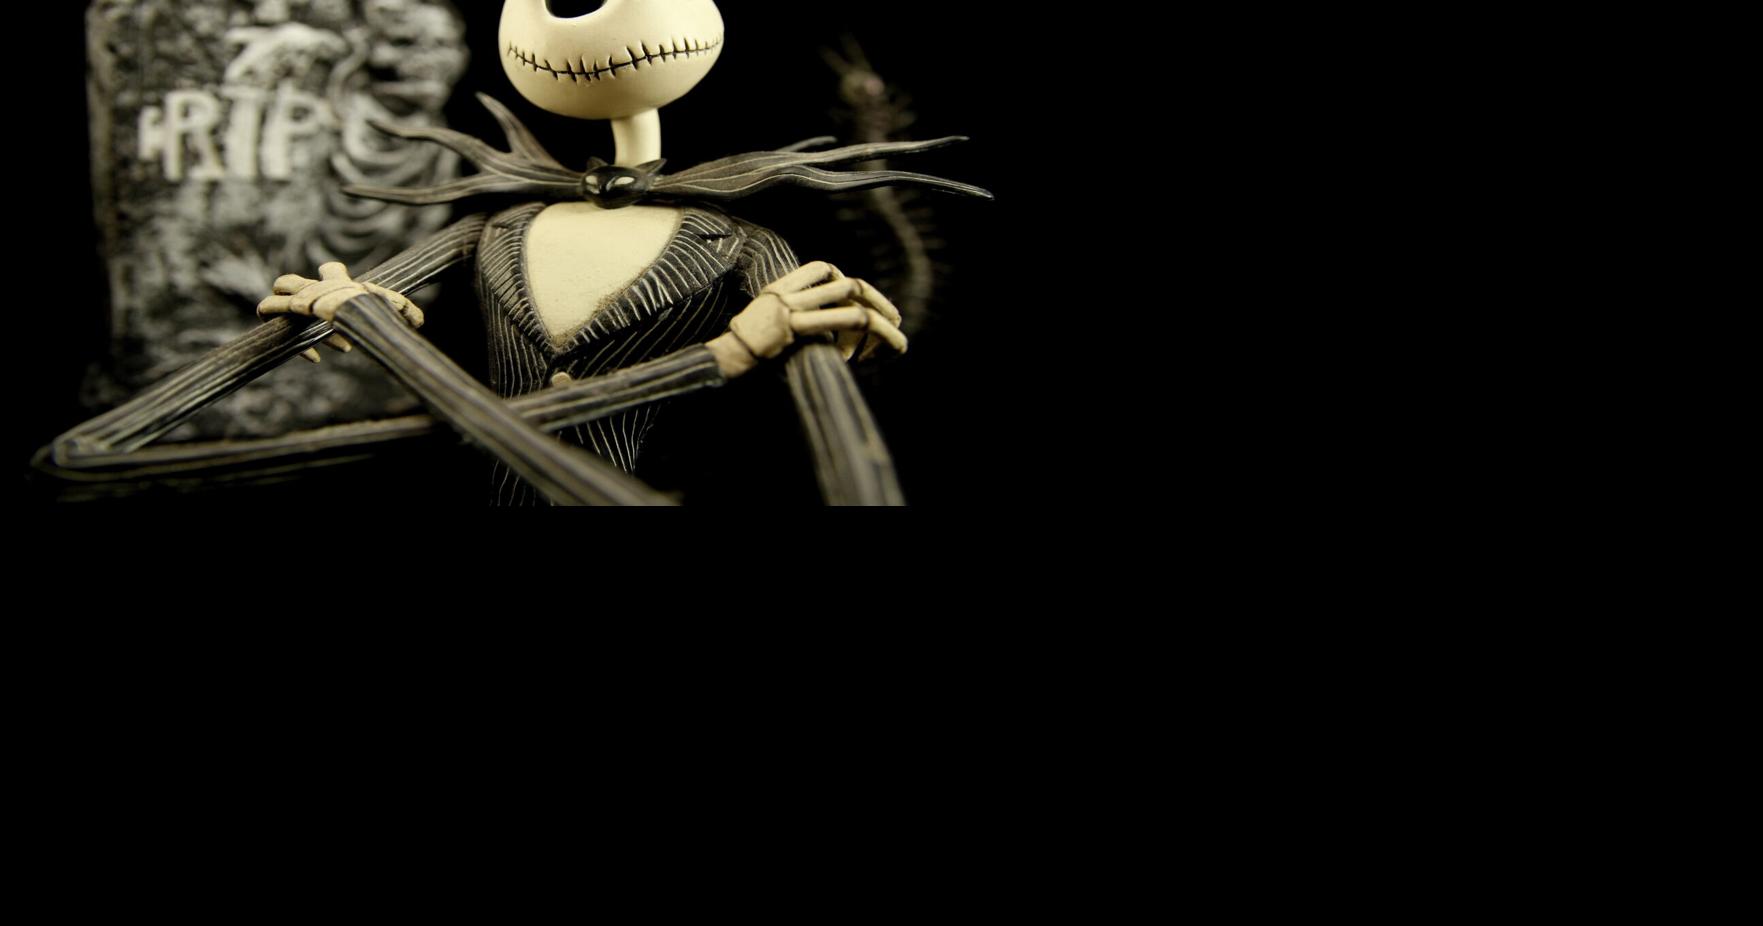 Opinion, 'The Nightmare Before Christmas' is not a Christmas movie, Opinion